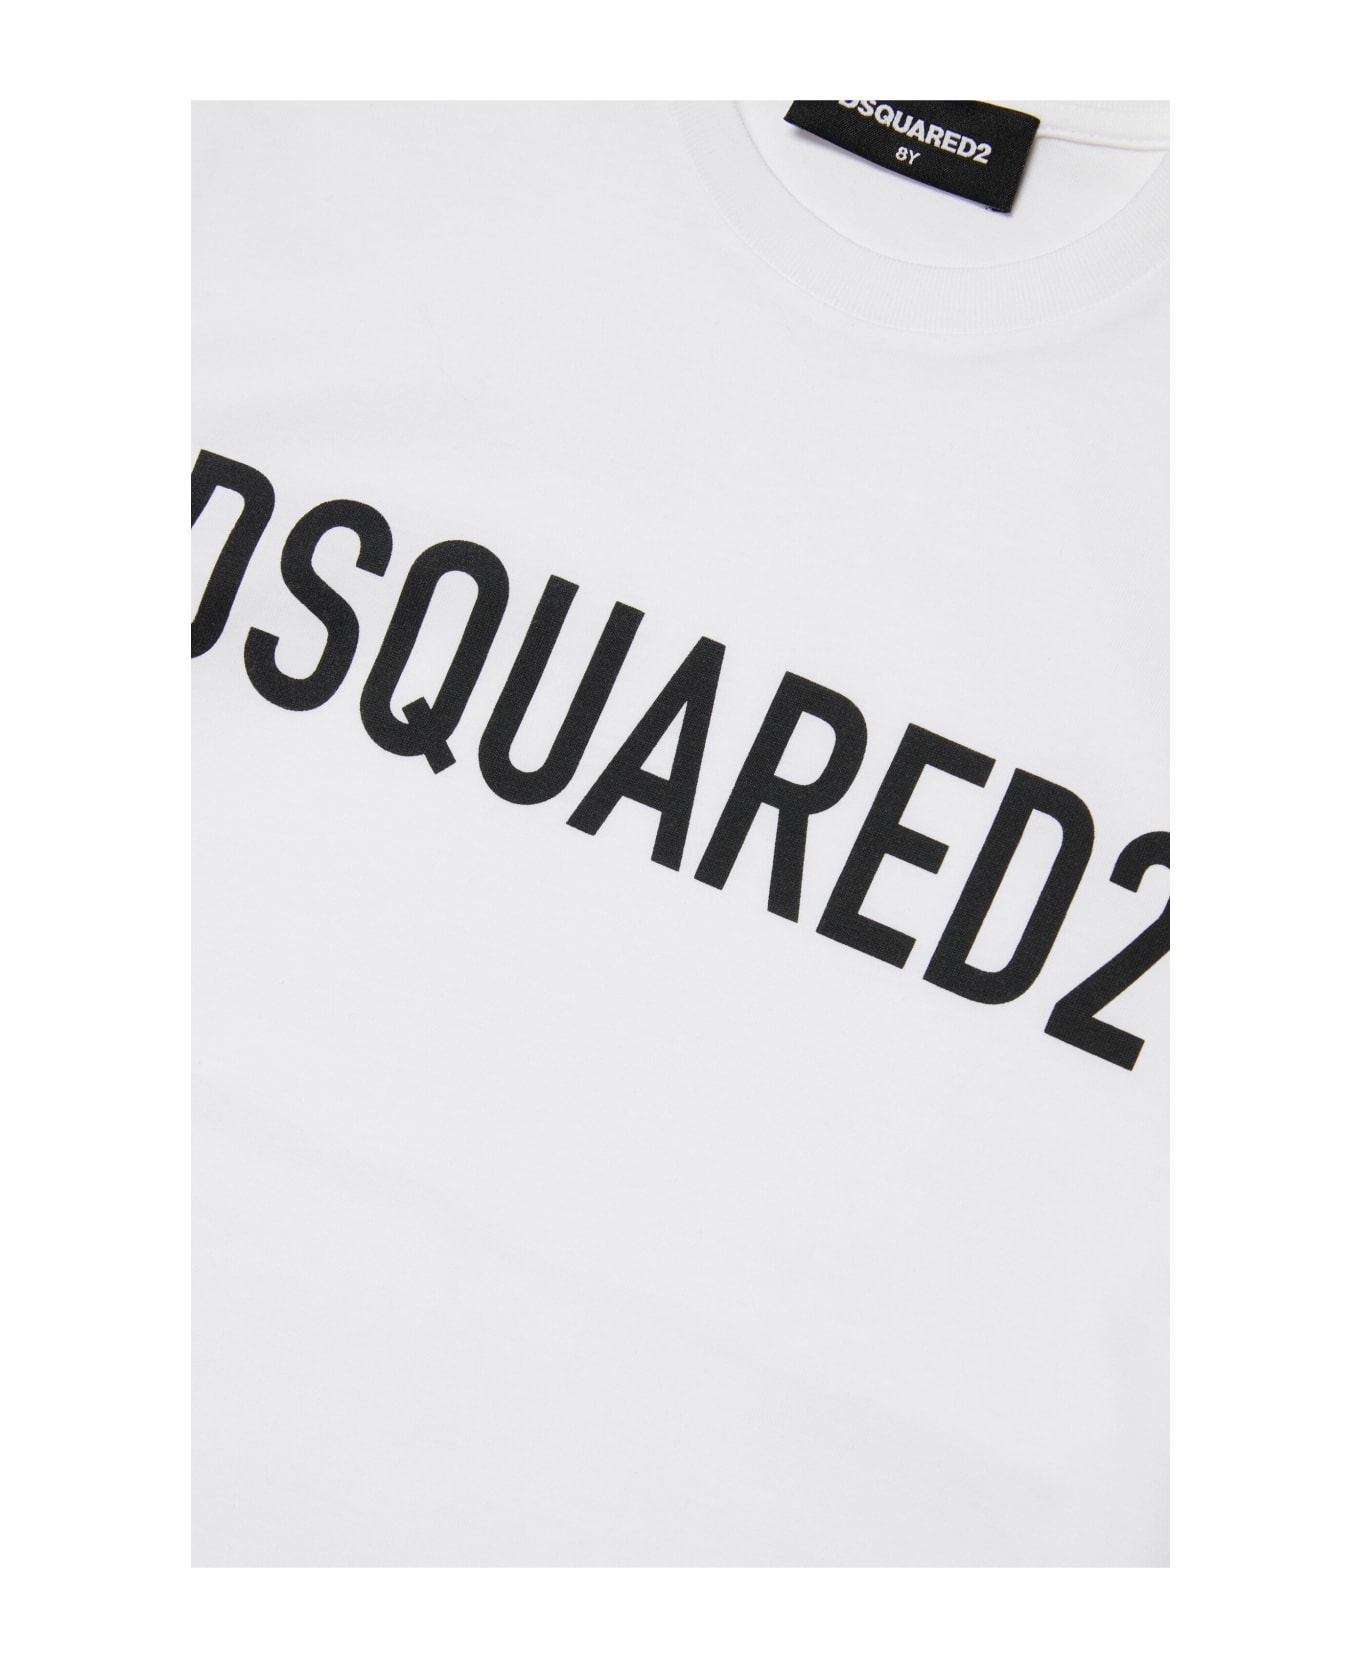 Dsquared2 D2t971u Relax-eco T-shirt Dsquared Organic Cotton Jersey Crewneck T-shirt With Logo - White